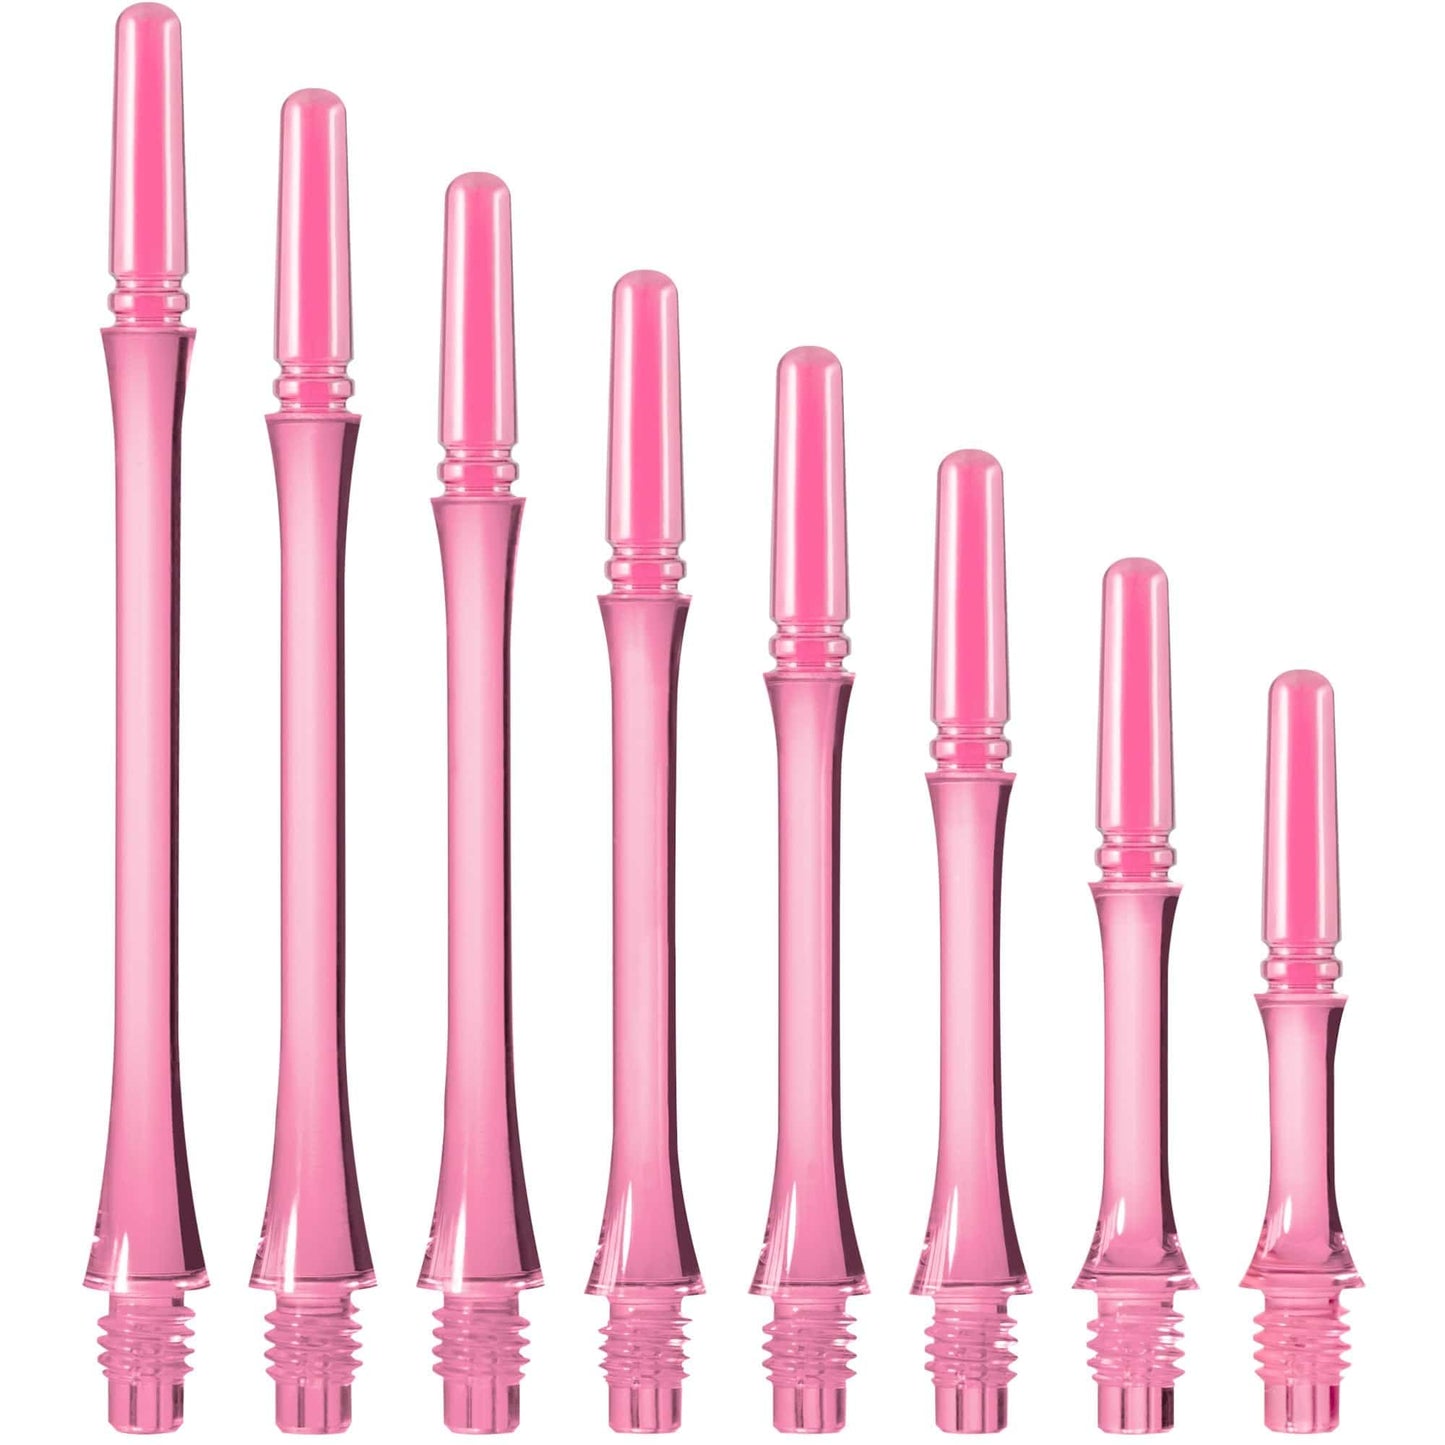 Cosmo Fit Shaft Gear - Spinning - Slim - Clear Pink Cosmo Size 1 - 13mm